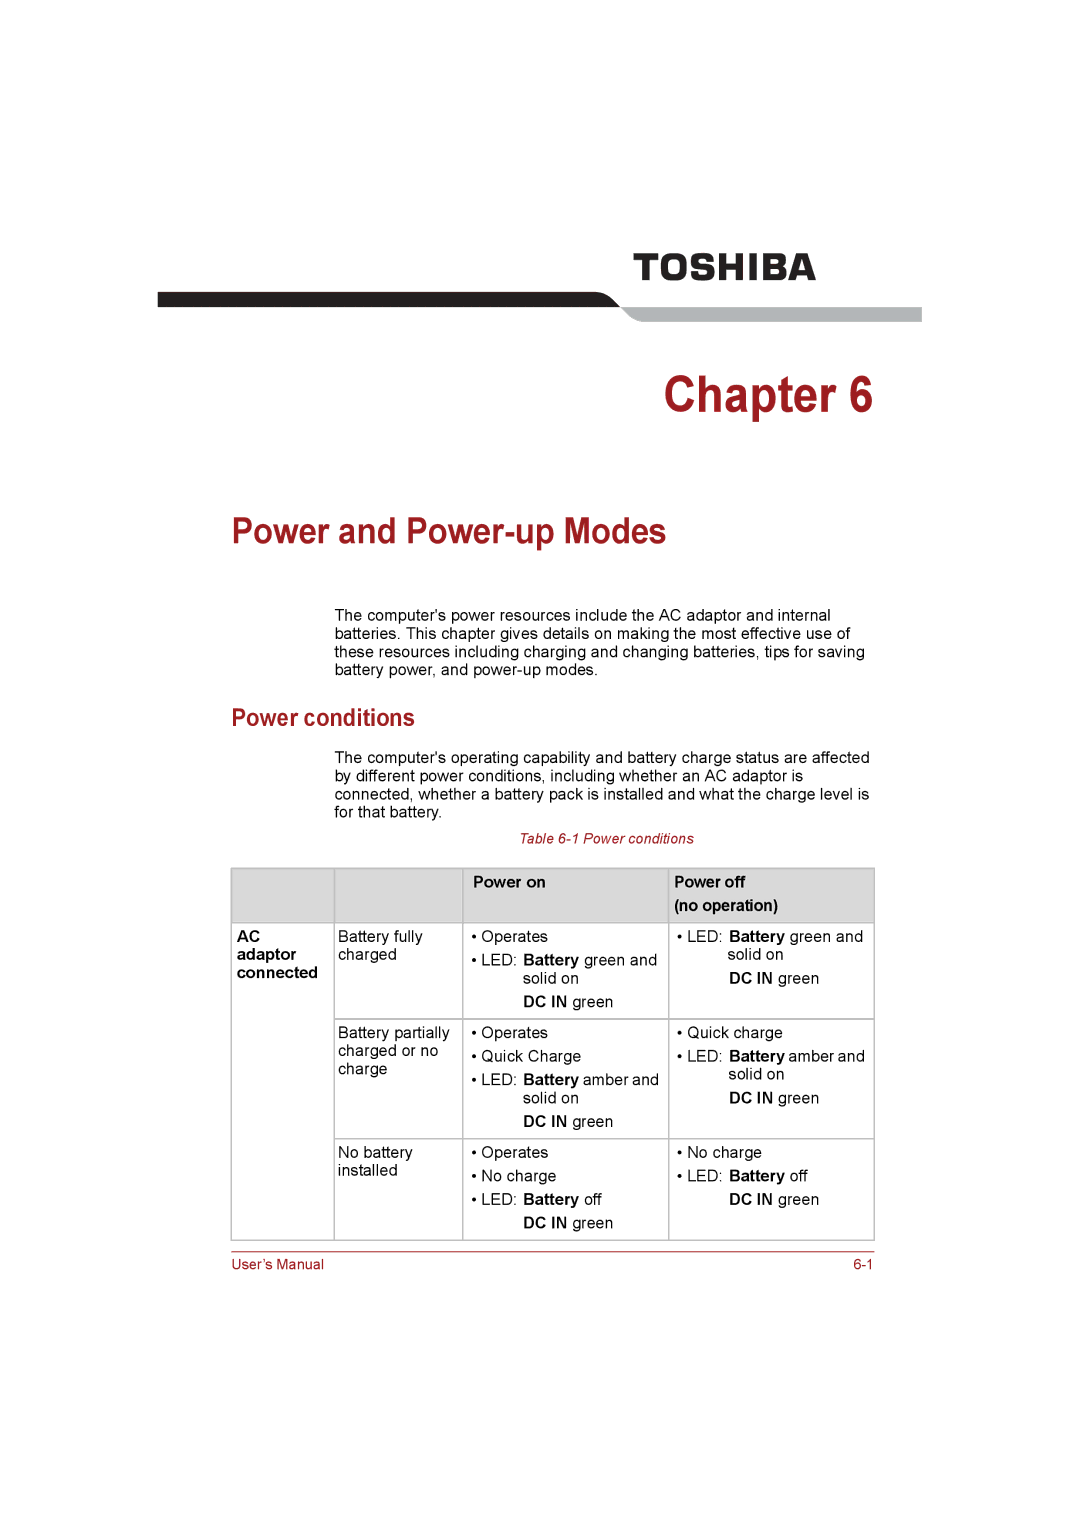 Toshiba NB255N245 user manual Power and Power-up Modes, Power conditions 